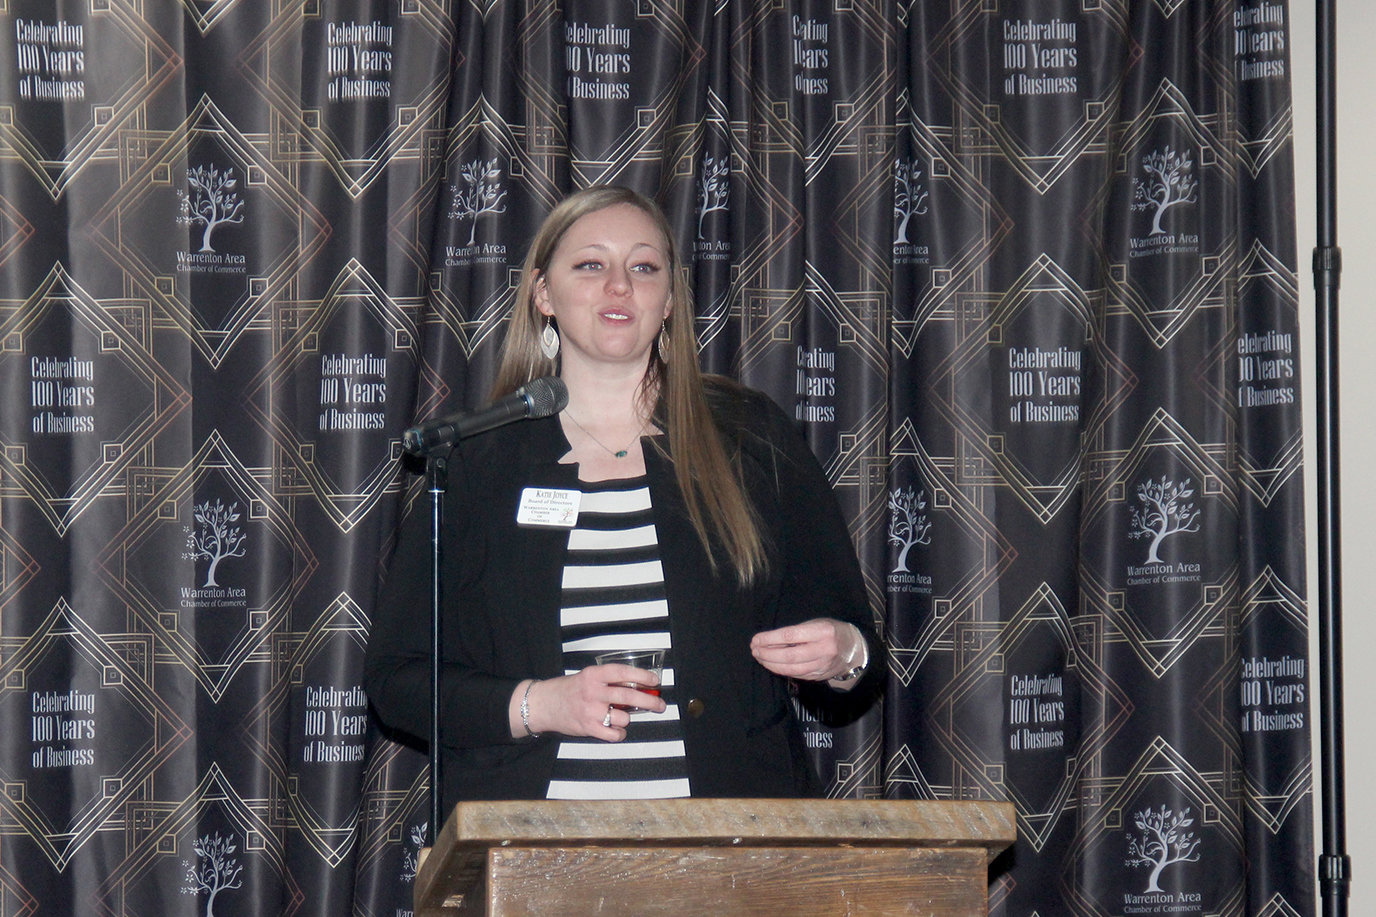 LEADING CELEBRATION — Warrenton Chamber of Commerce President Katie Joyce provides complimentary remarks at the beginning of a Jan. 13 banquet and awards ceremony marking the Chamber’s 100th anniversary.